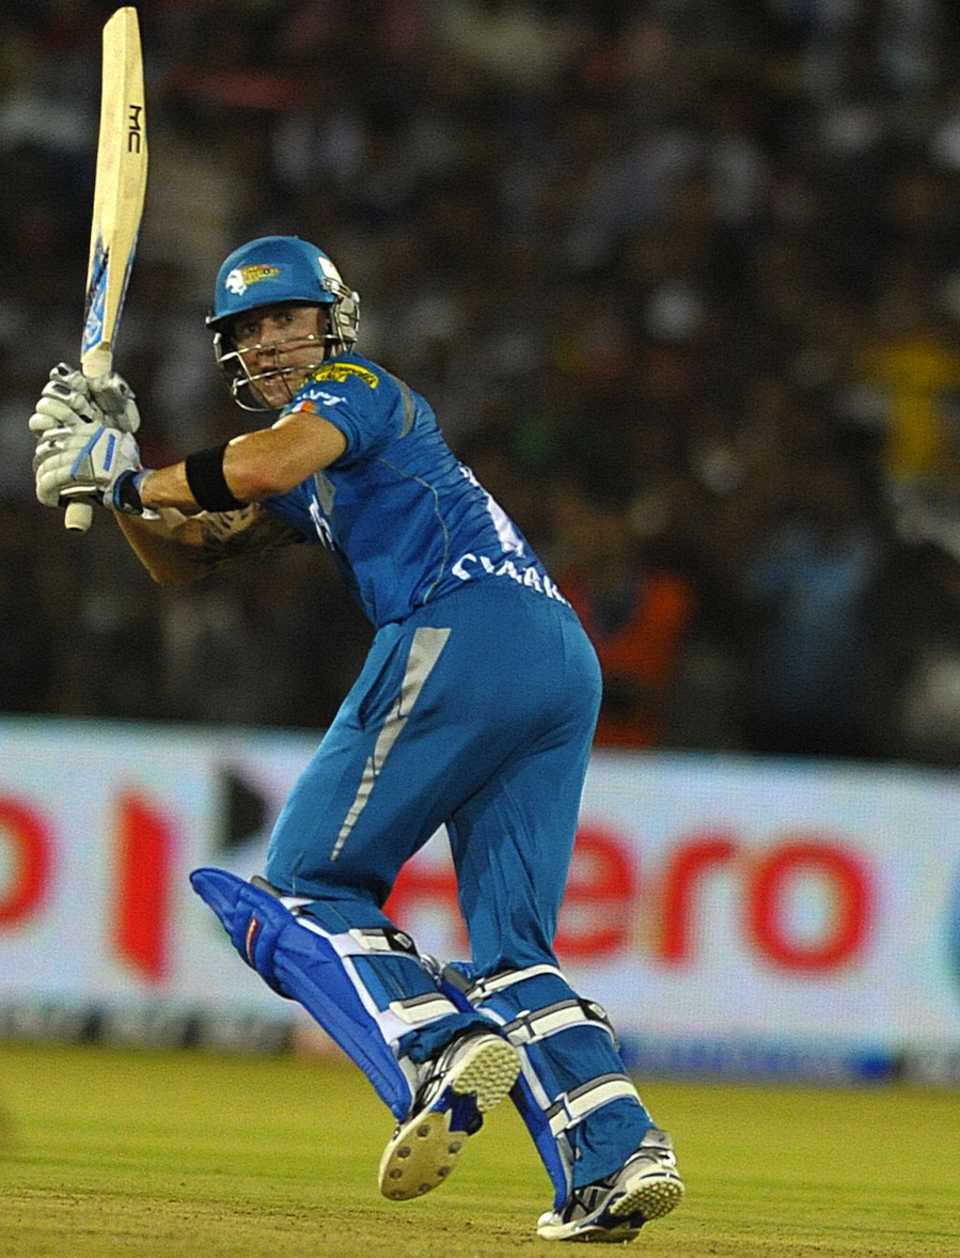 Michael Clarke scored 41 in his debut game in IPL, Deccan Chargers v Pune Warriors, IPL, Cuttack, May 1, 2012